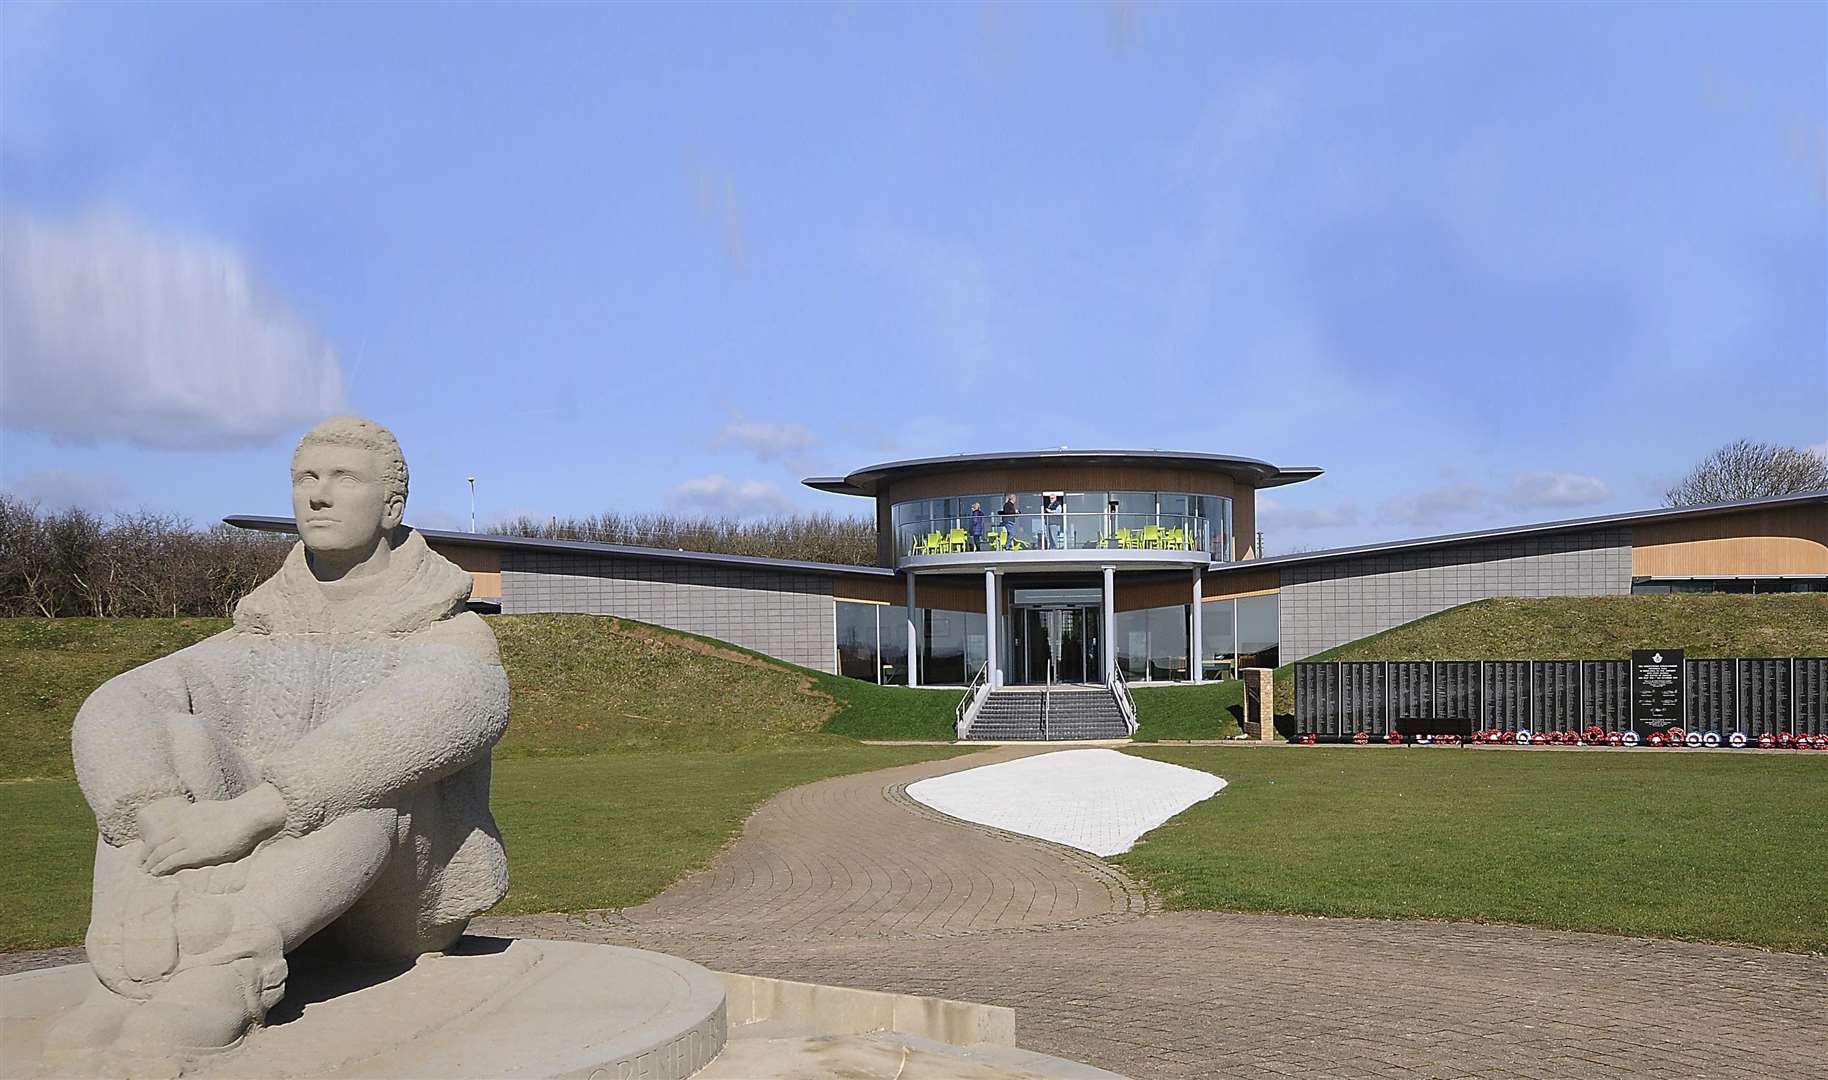 The Battle of Britain Memorial, near Folkestone, is currently closed to visitors